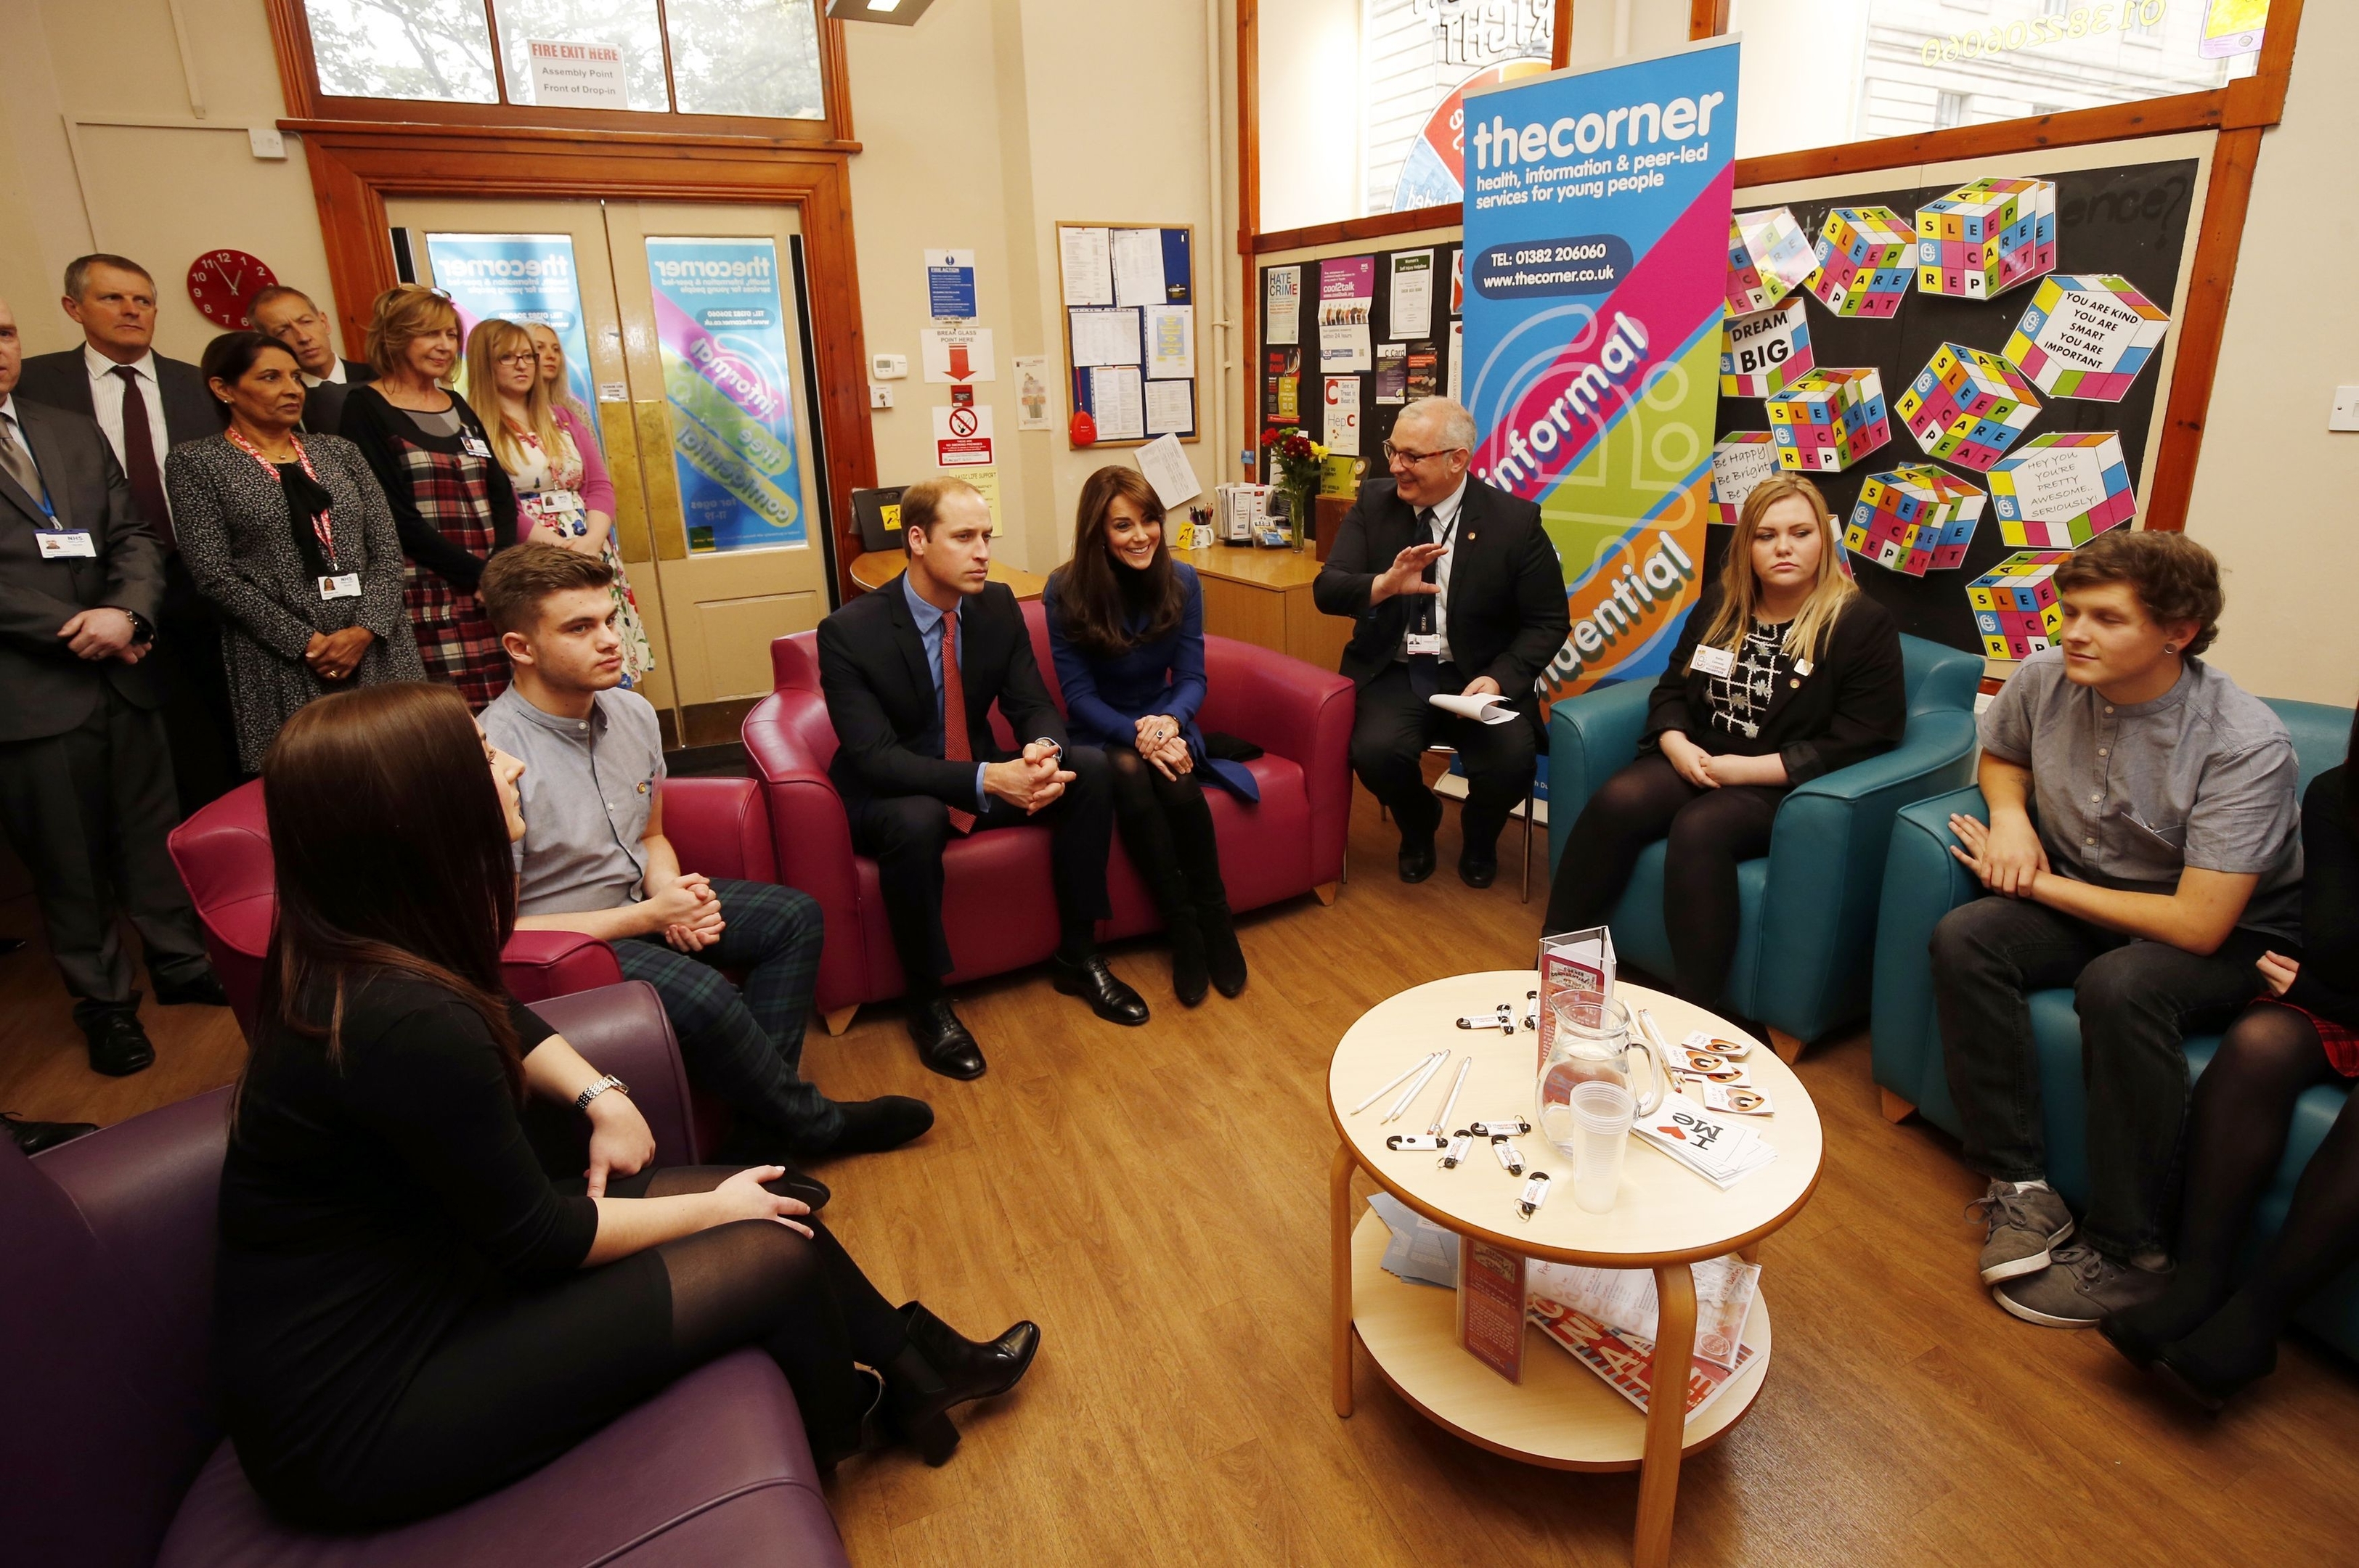 The Duke and Duchess of Cambridge during their visit to The Corner where they participated in an anti-bullying workshop as part of their visit to Dundee 